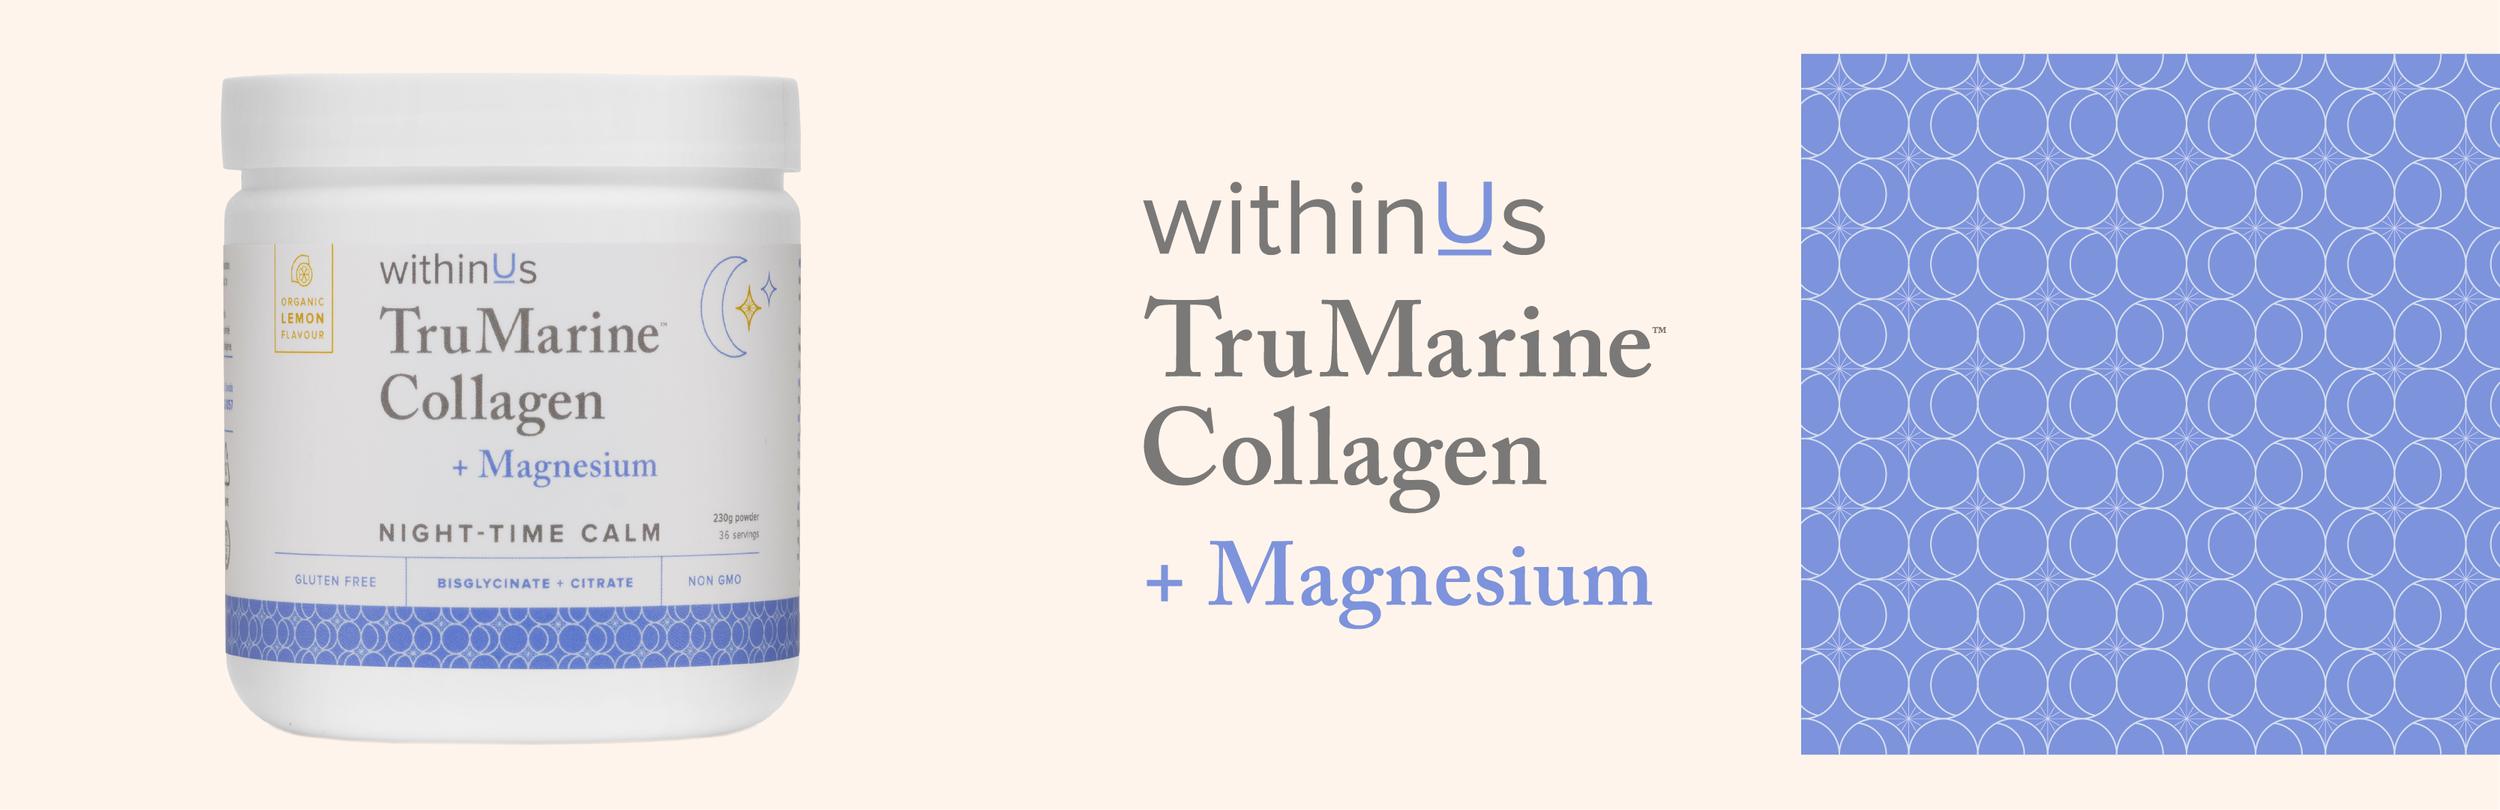 withinUs-Product-Design_Magnesium.png